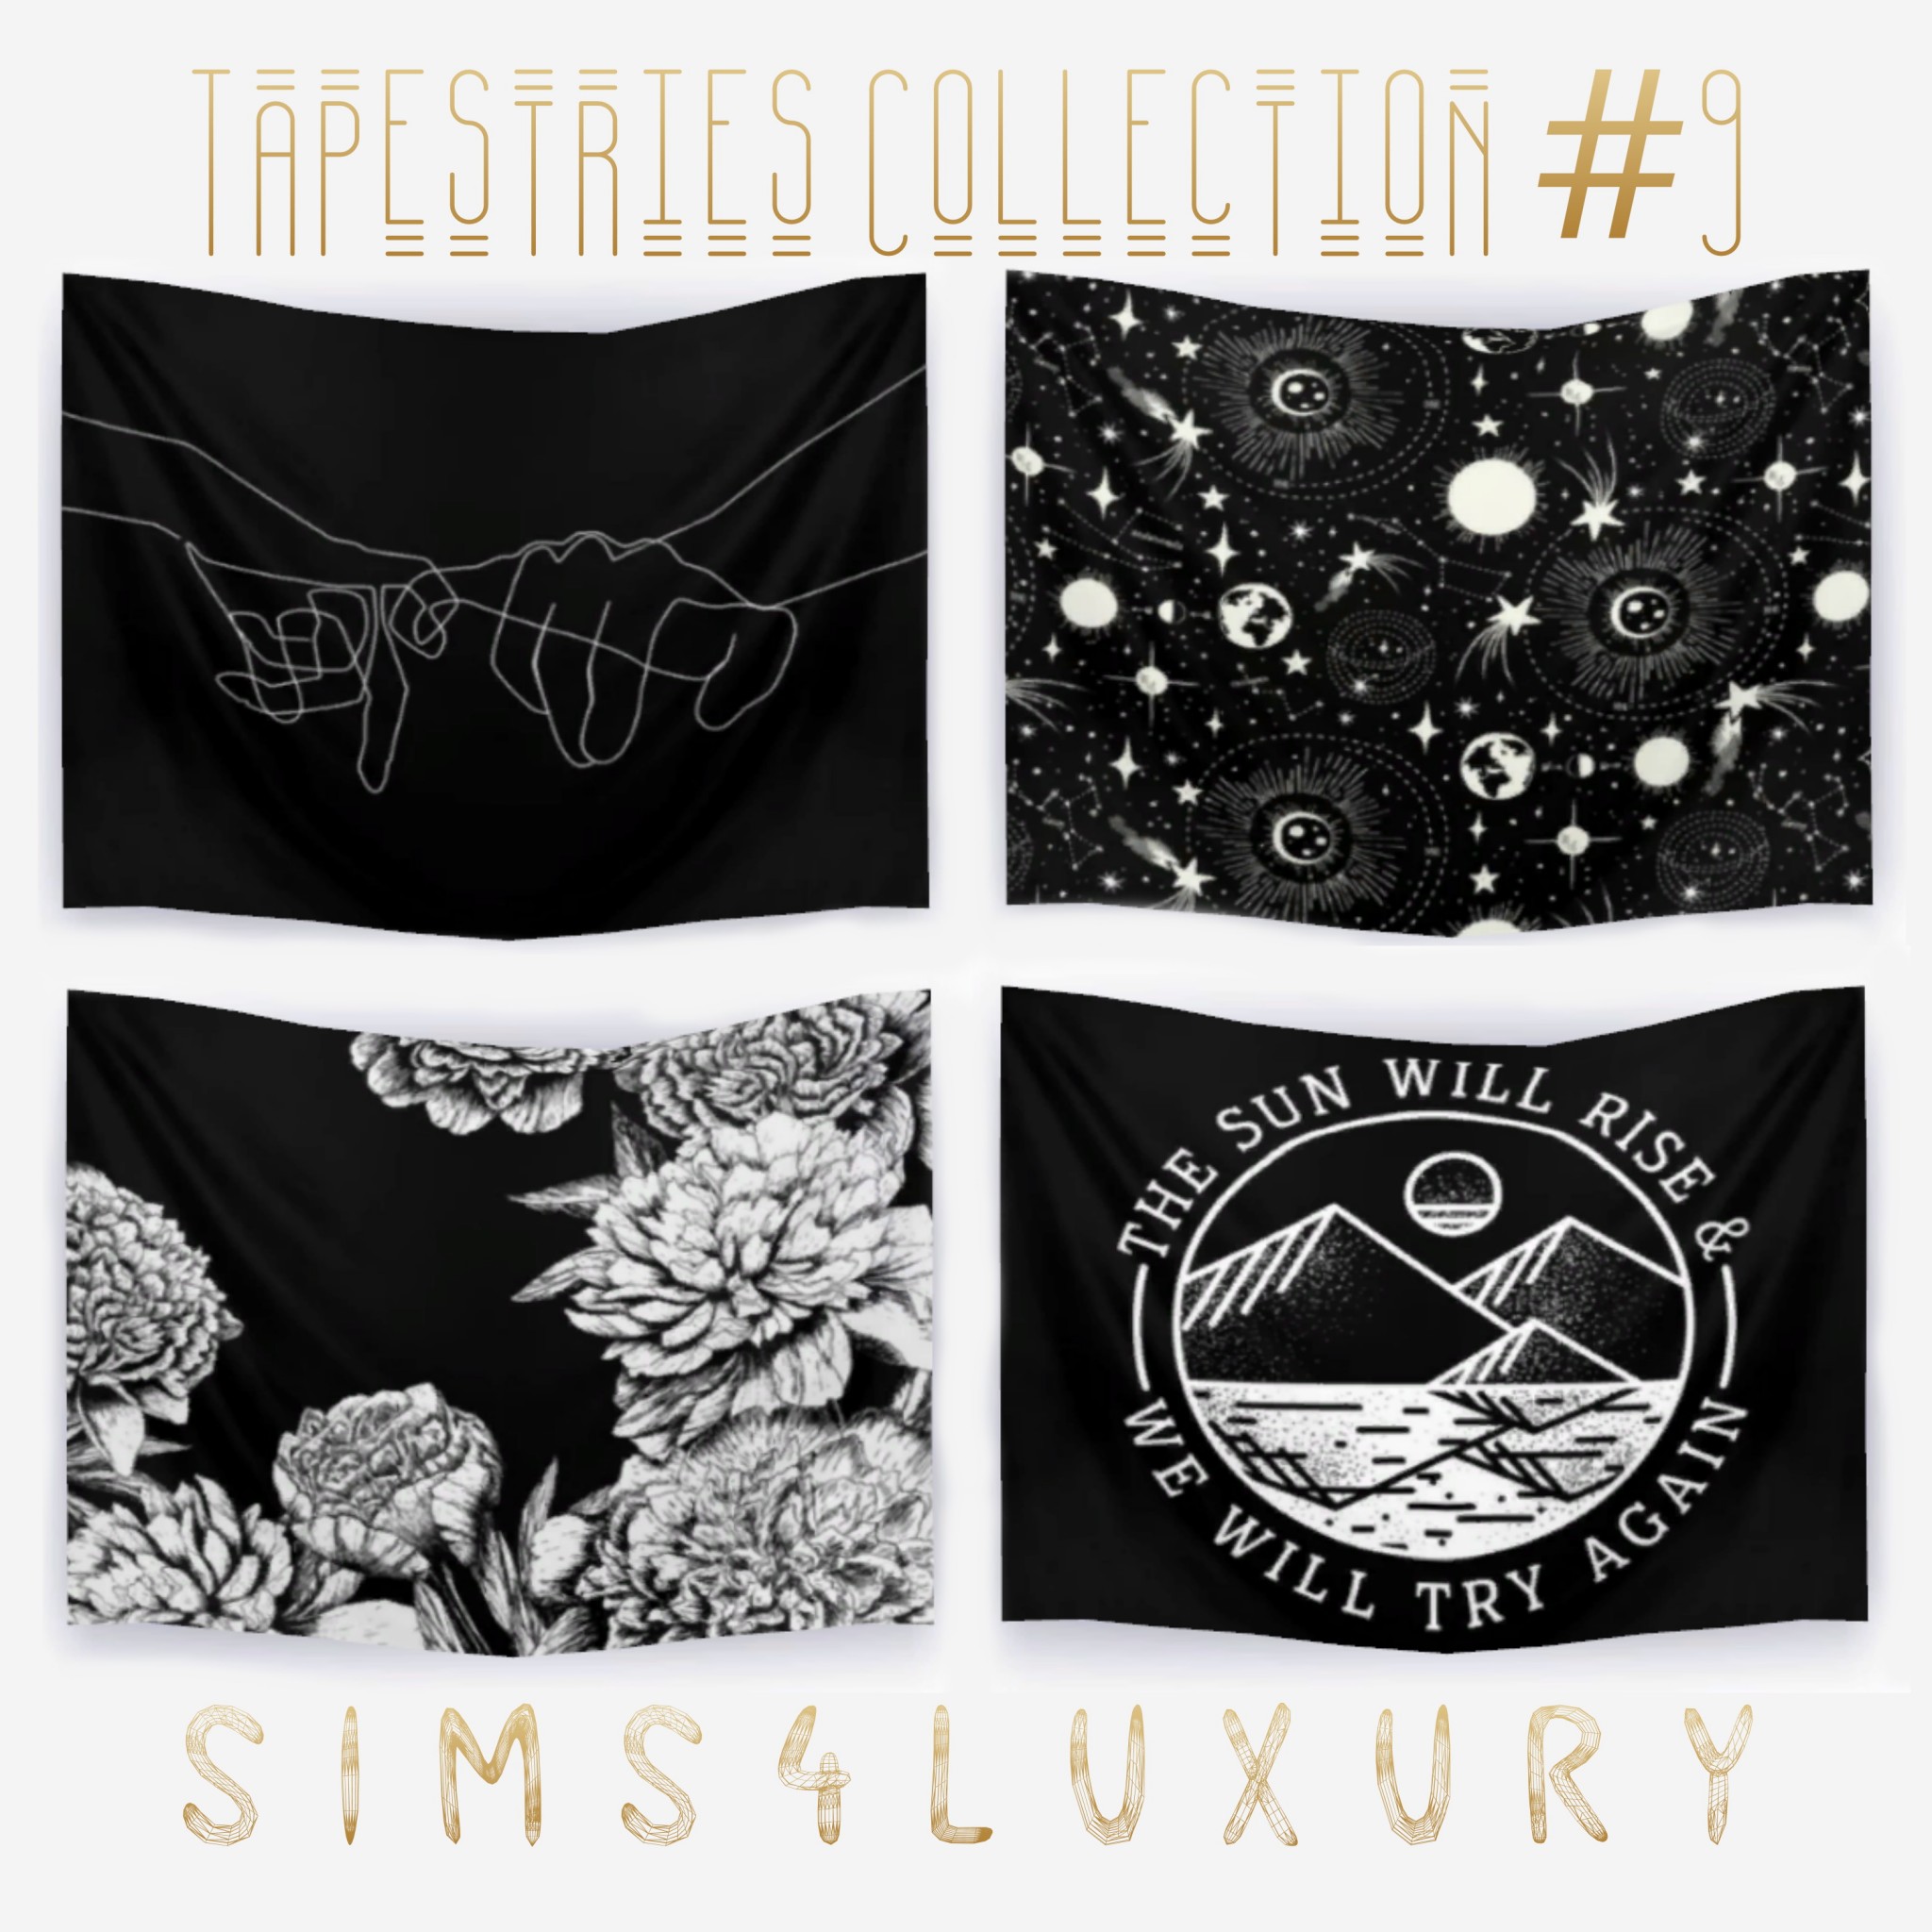 Sims4Luxury: Tapestries Collection 9 • Sims 4 Downloads